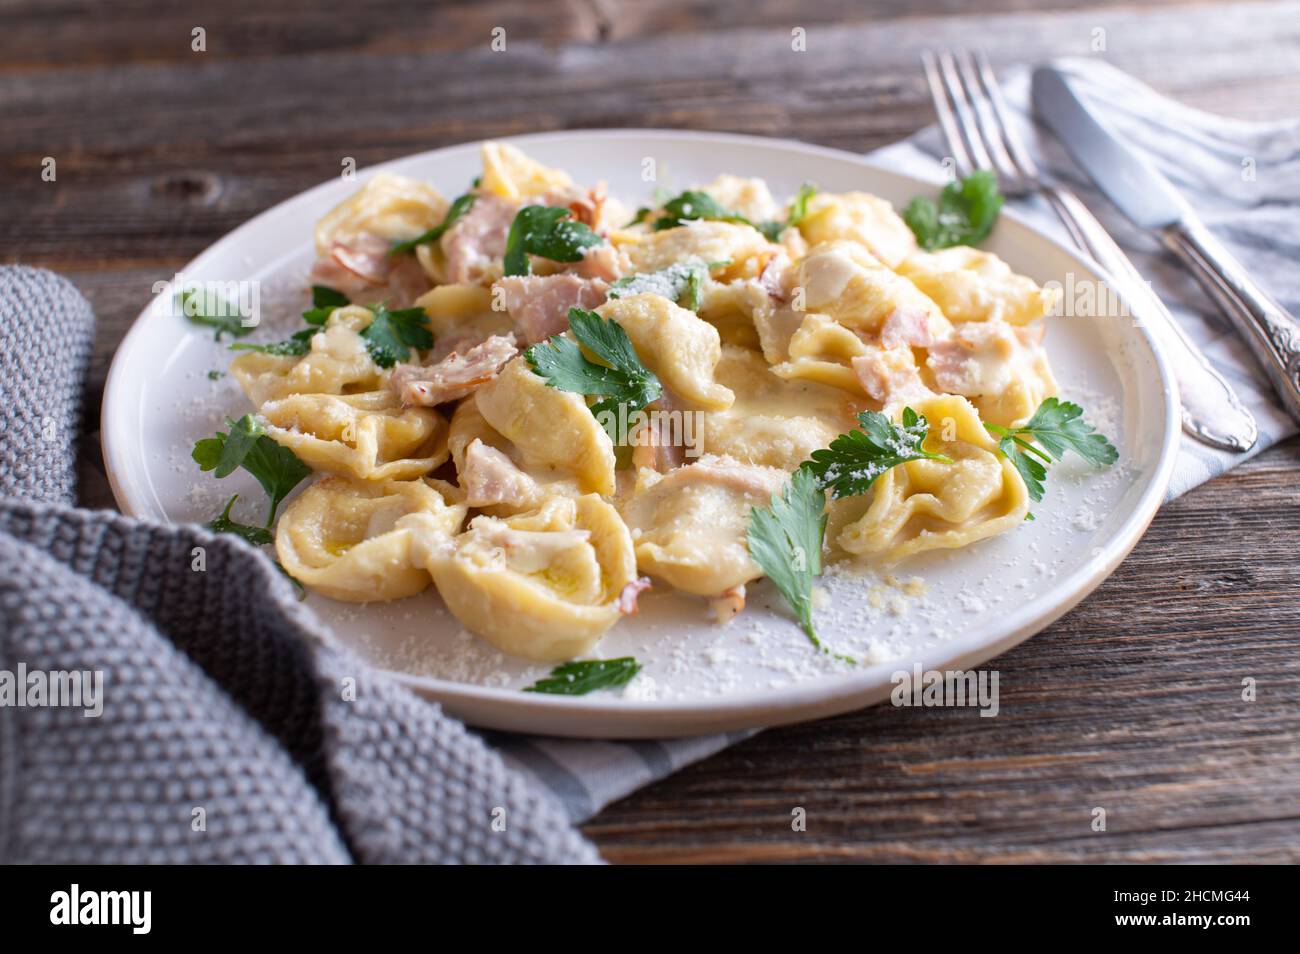 Tortellini alla panna. Traditional fresh cooked italian pasta dish. Served on a white plate isolated on wooden table background Stock Photo